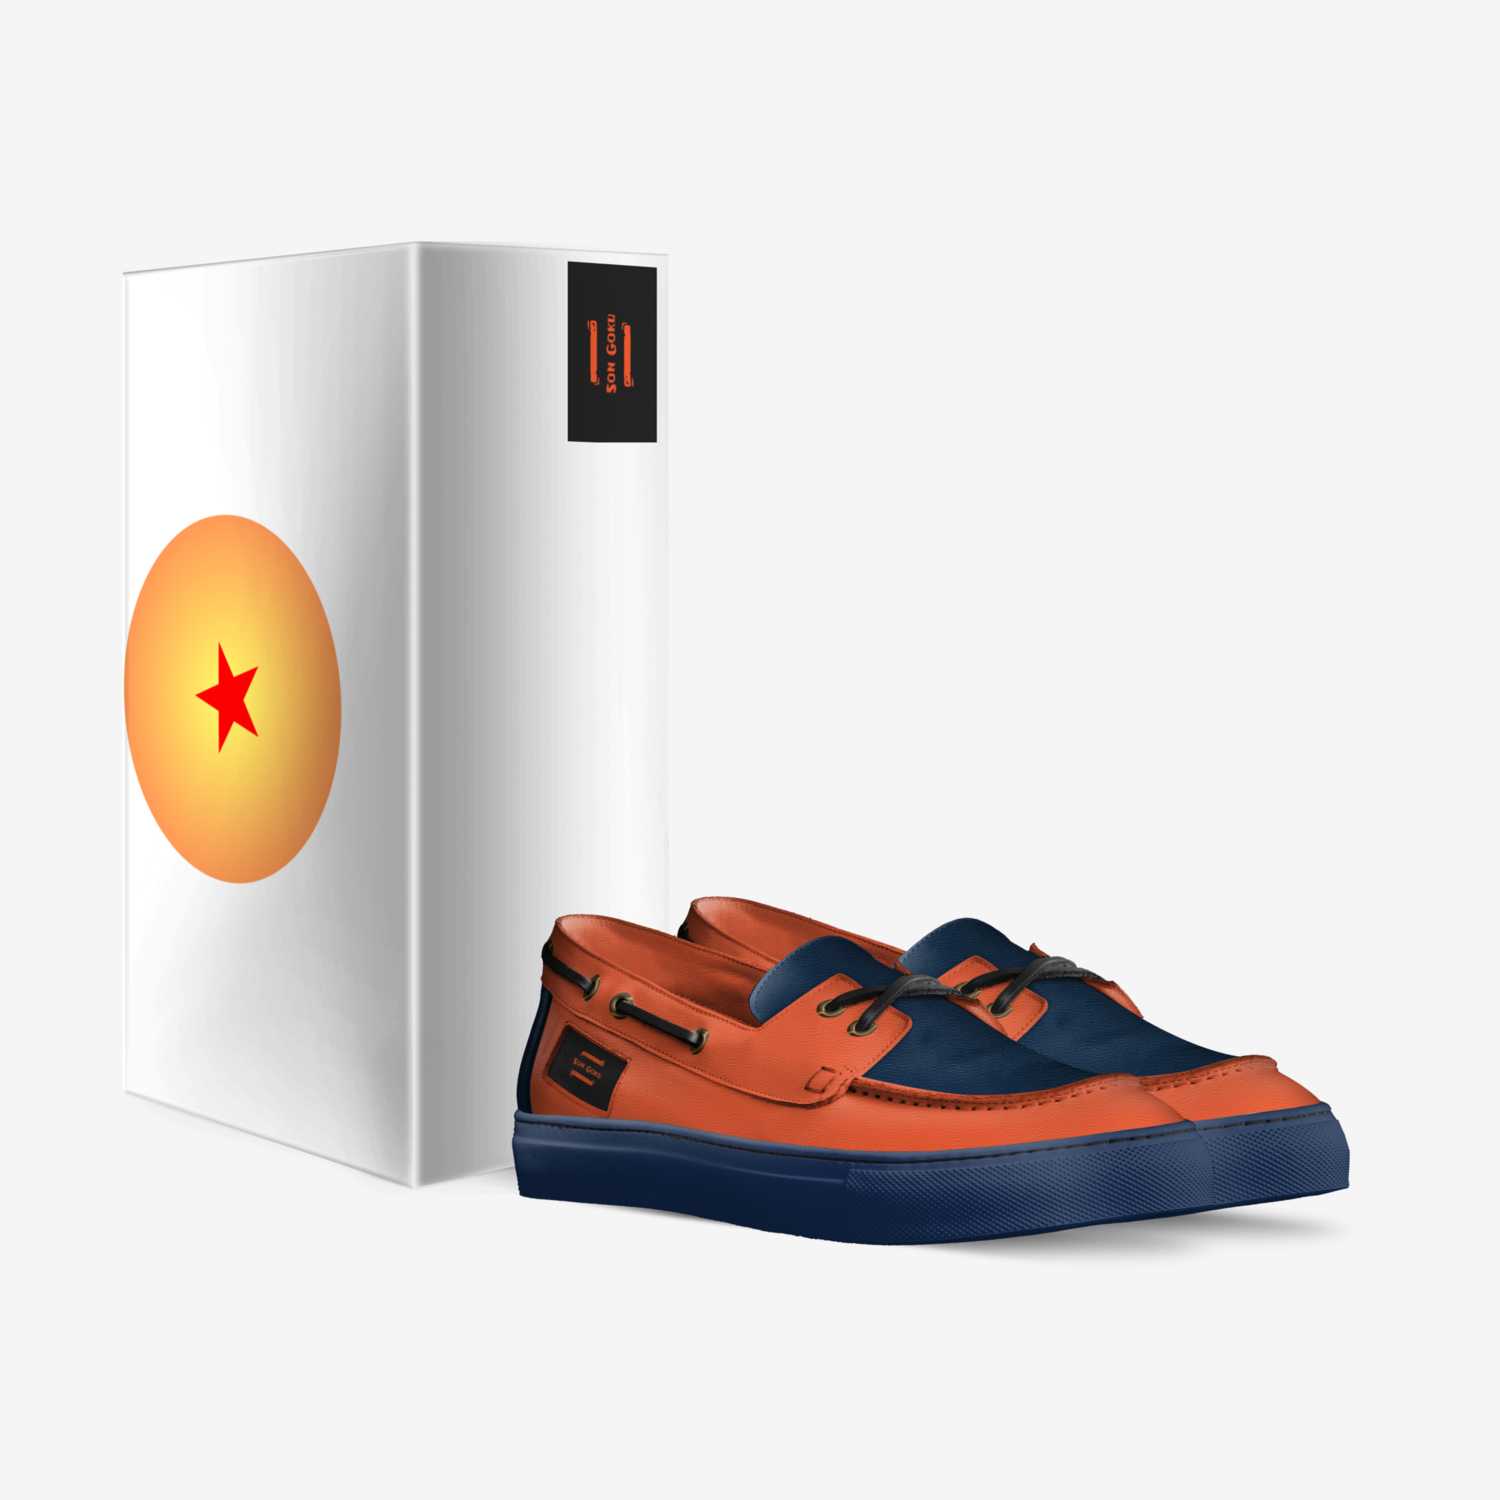 Dragonballs custom made in Italy shoes by Arthur Caulfield | Box view